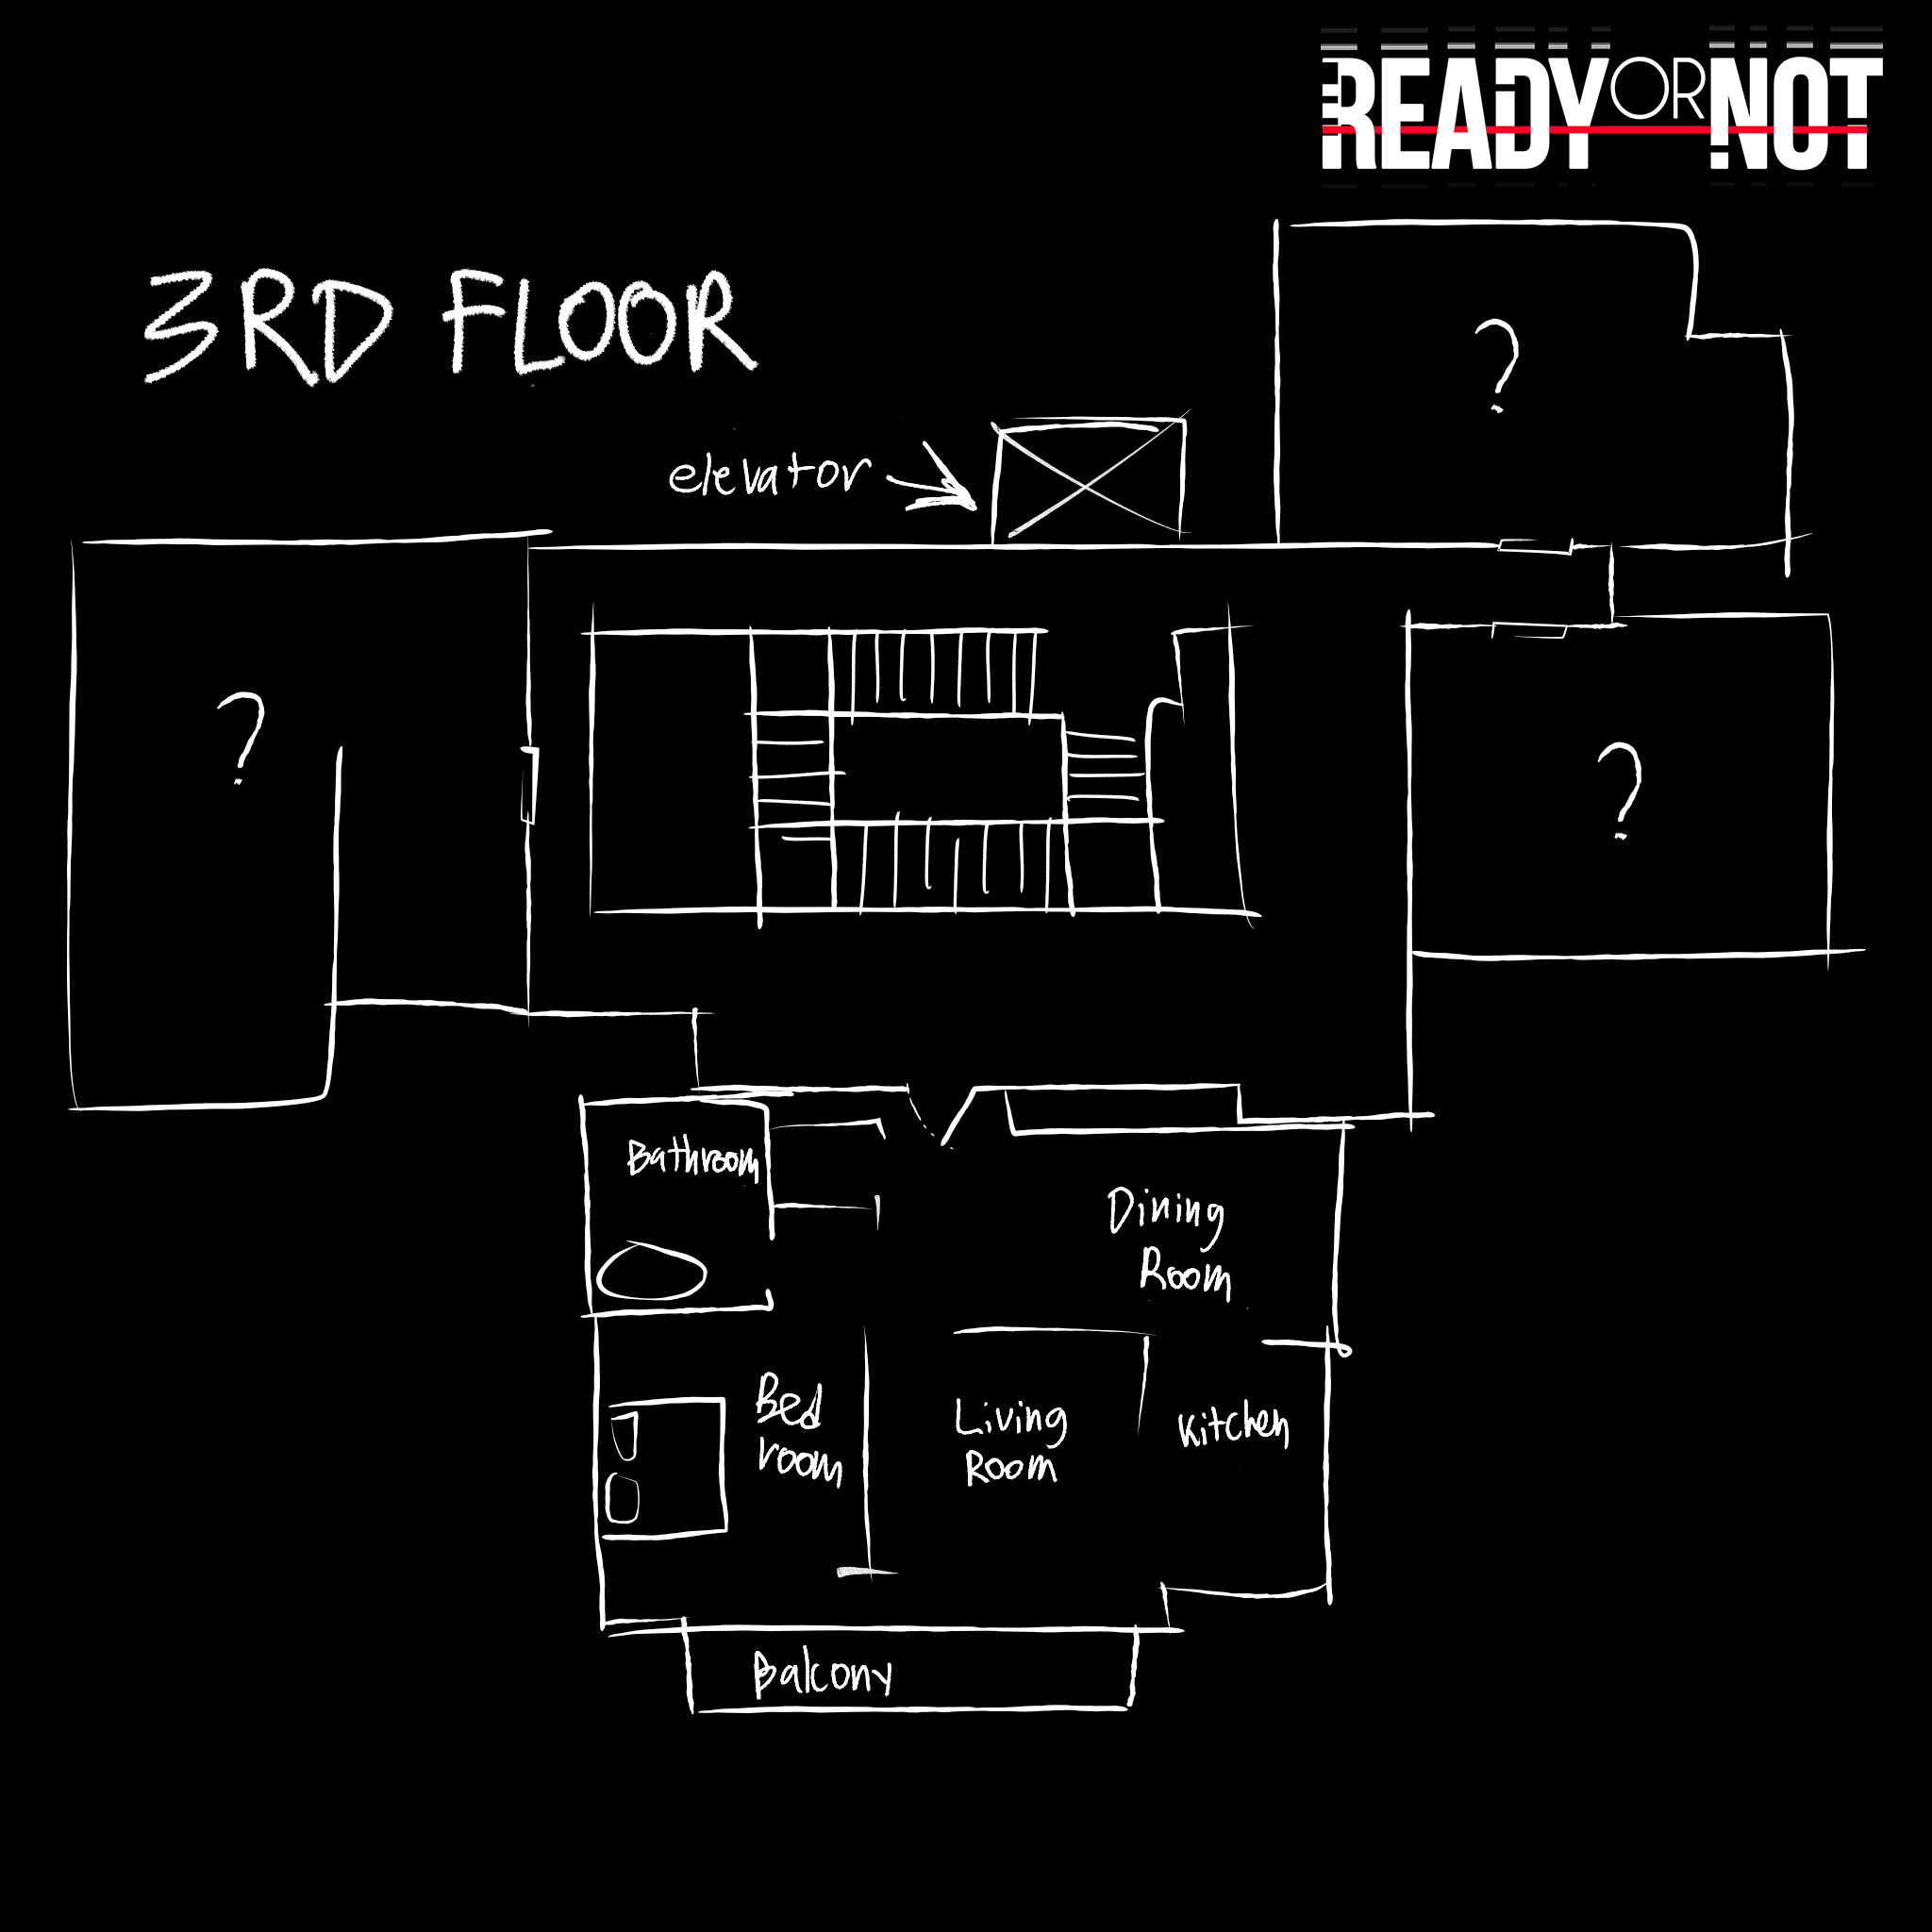 Read Or Not | Map Blueprints image 16